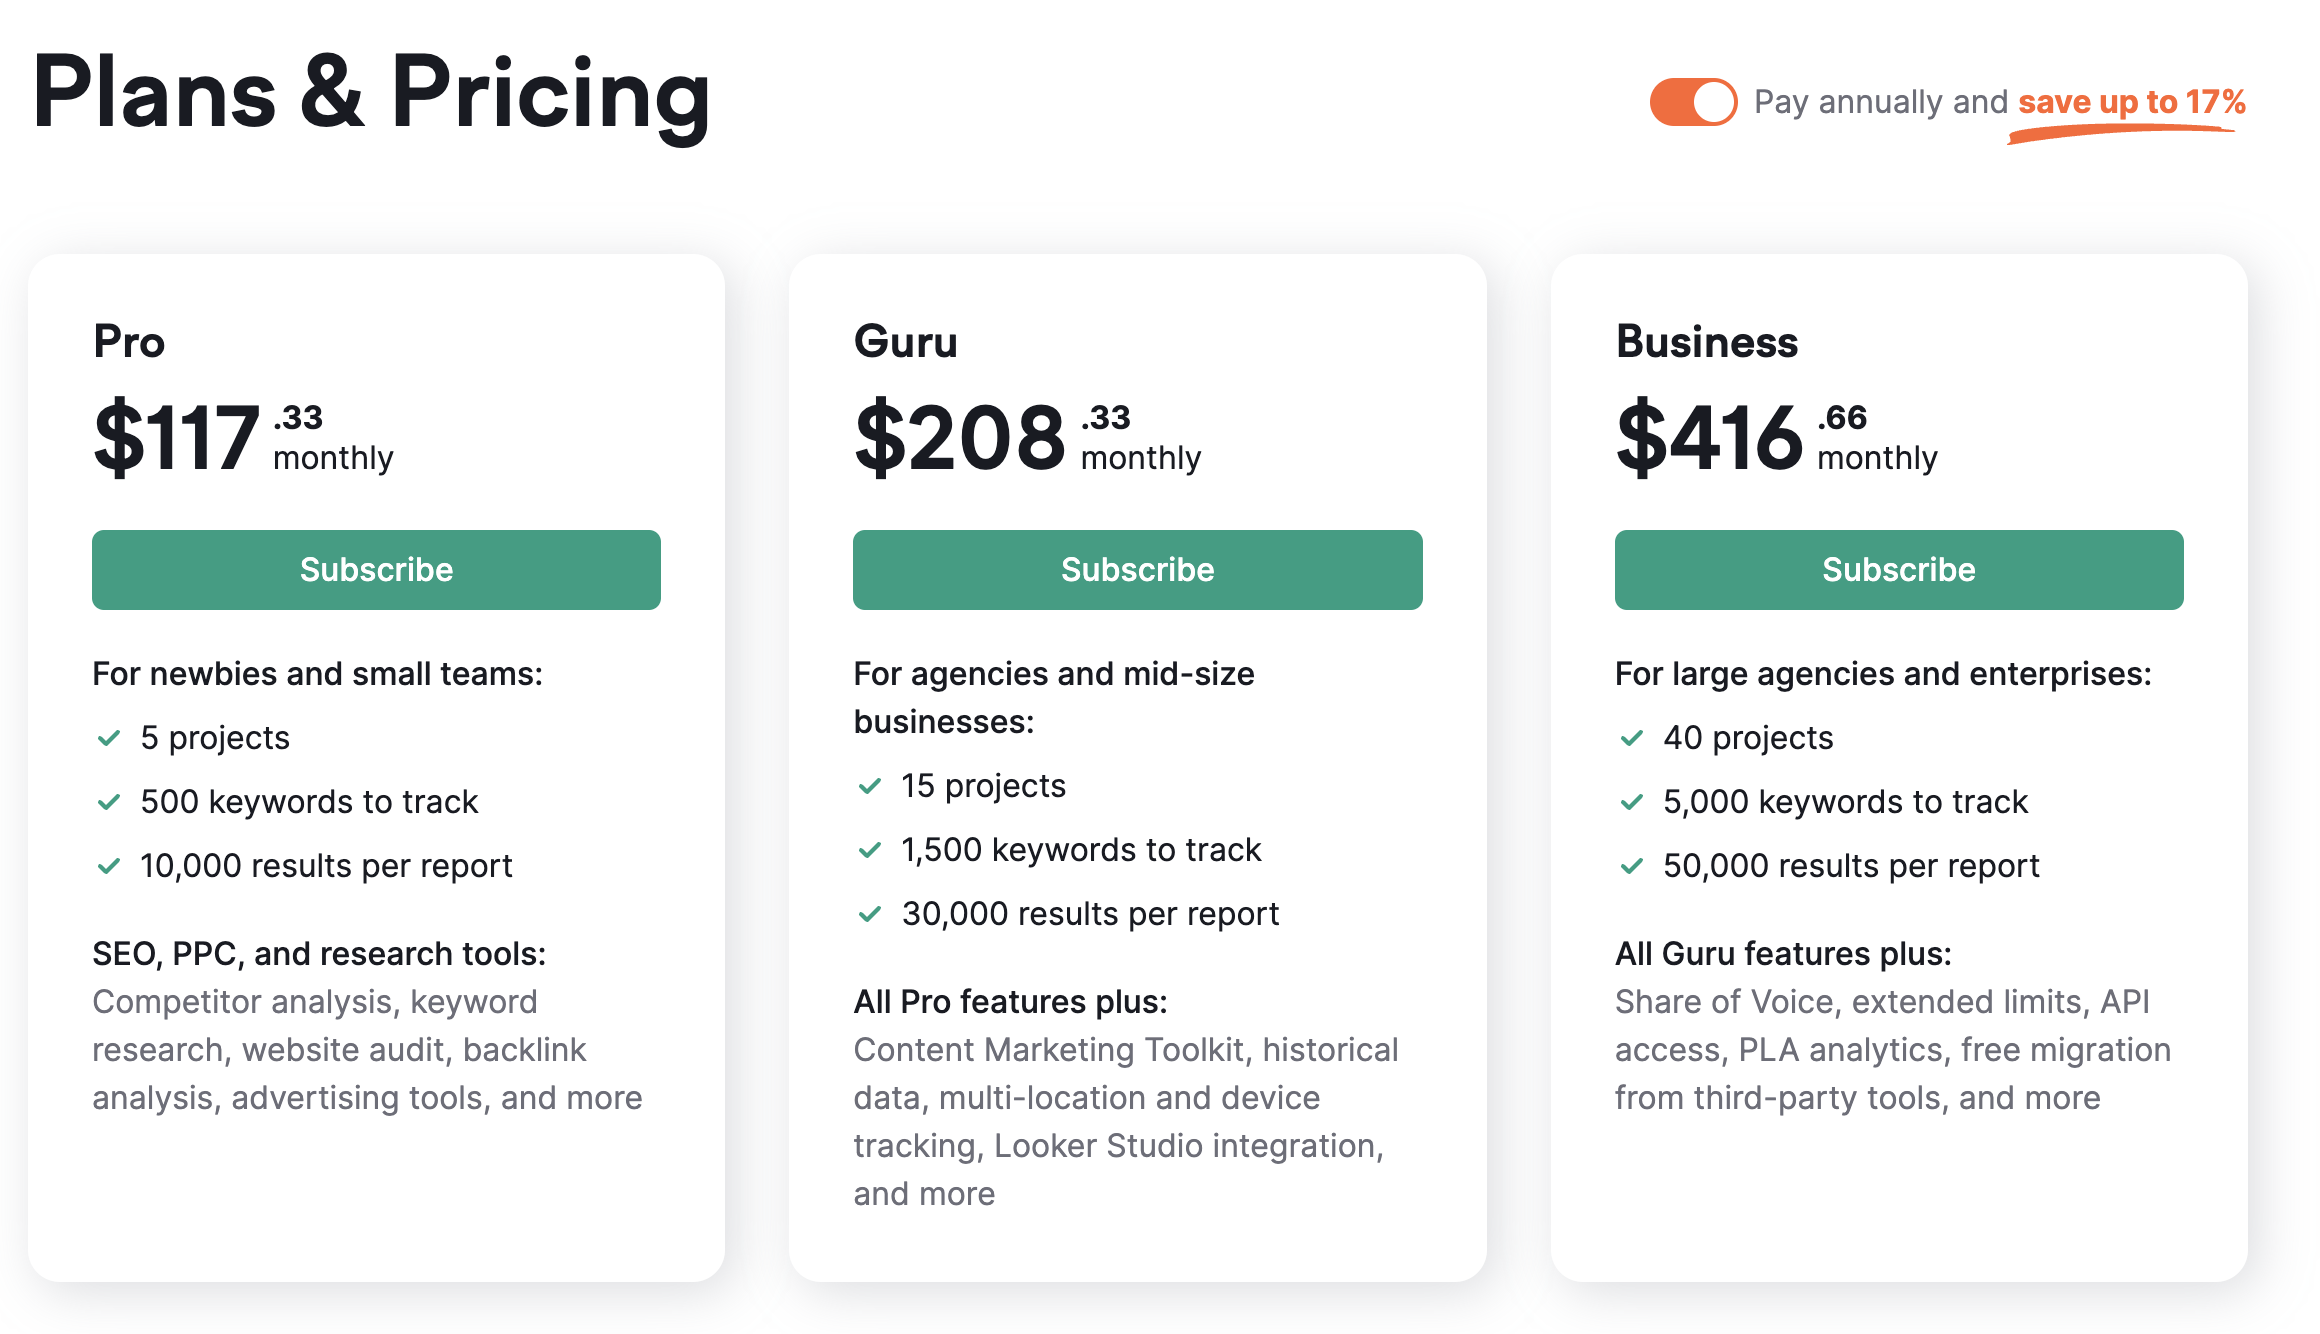 Plans & Pricing page with the annual toggle, which is located in the top-right corner, enabled.